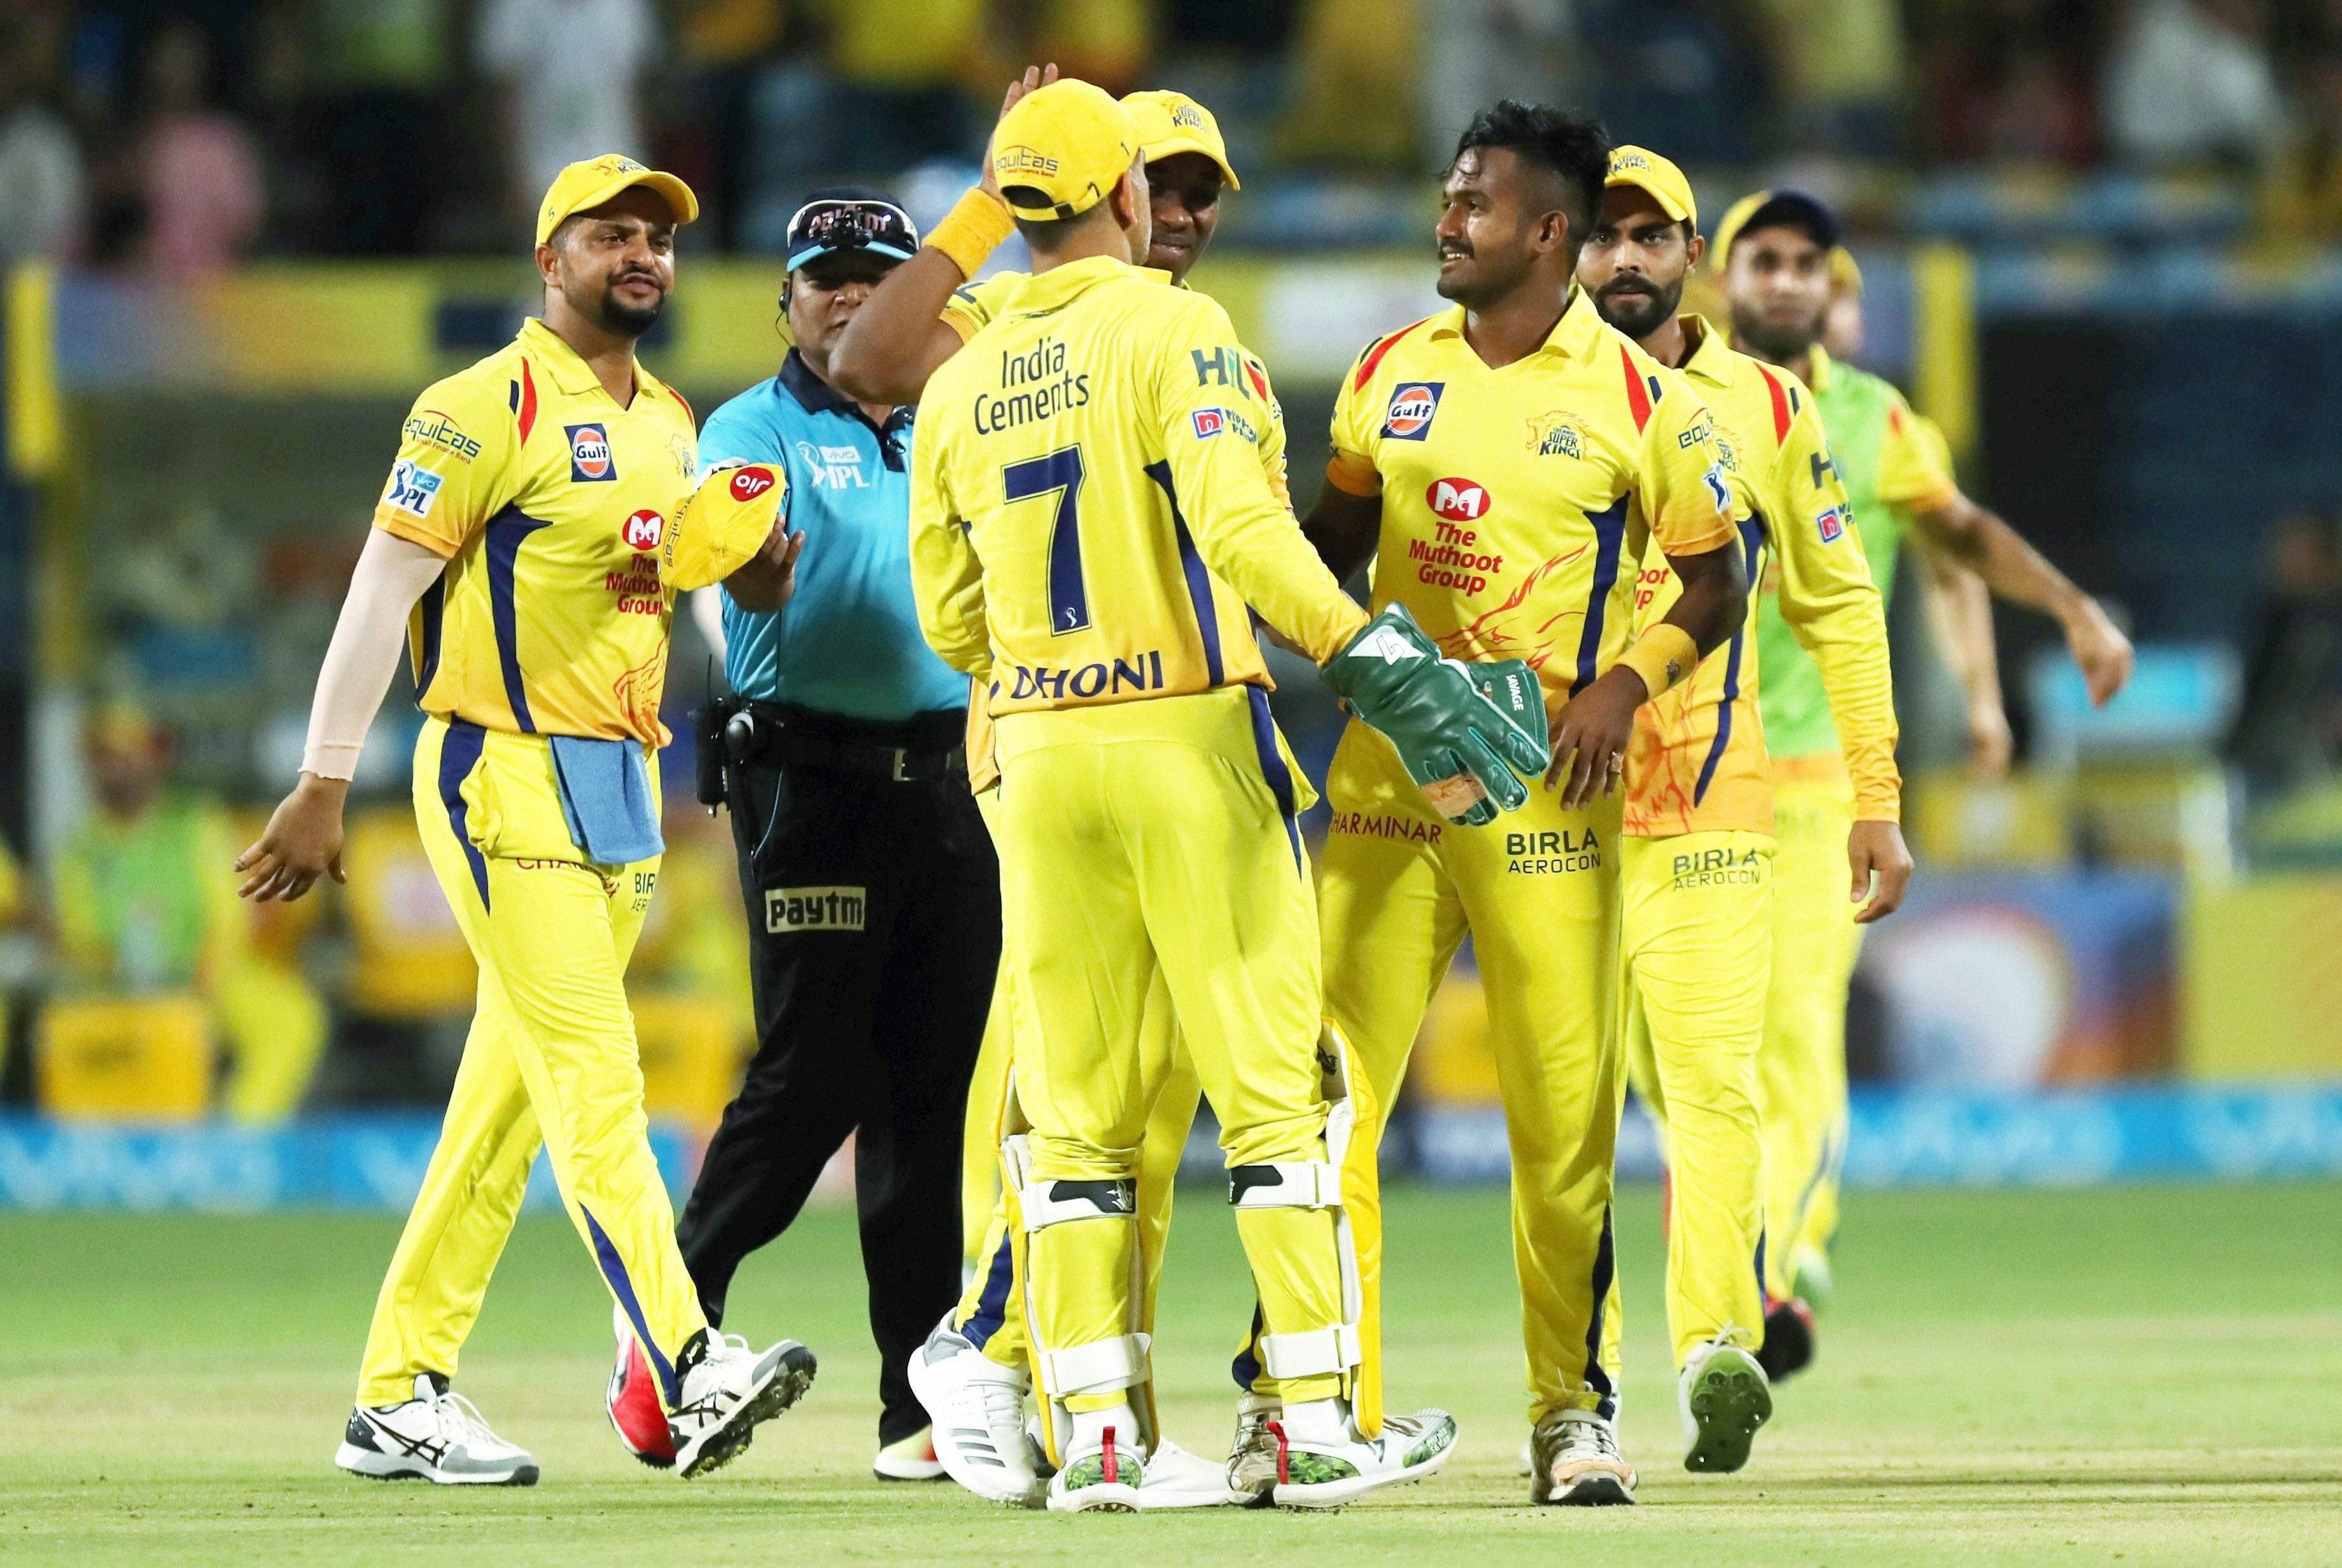 IN PICTURES. IPL 2018: Shane Watson, MS Dhoni star as Chennai Super